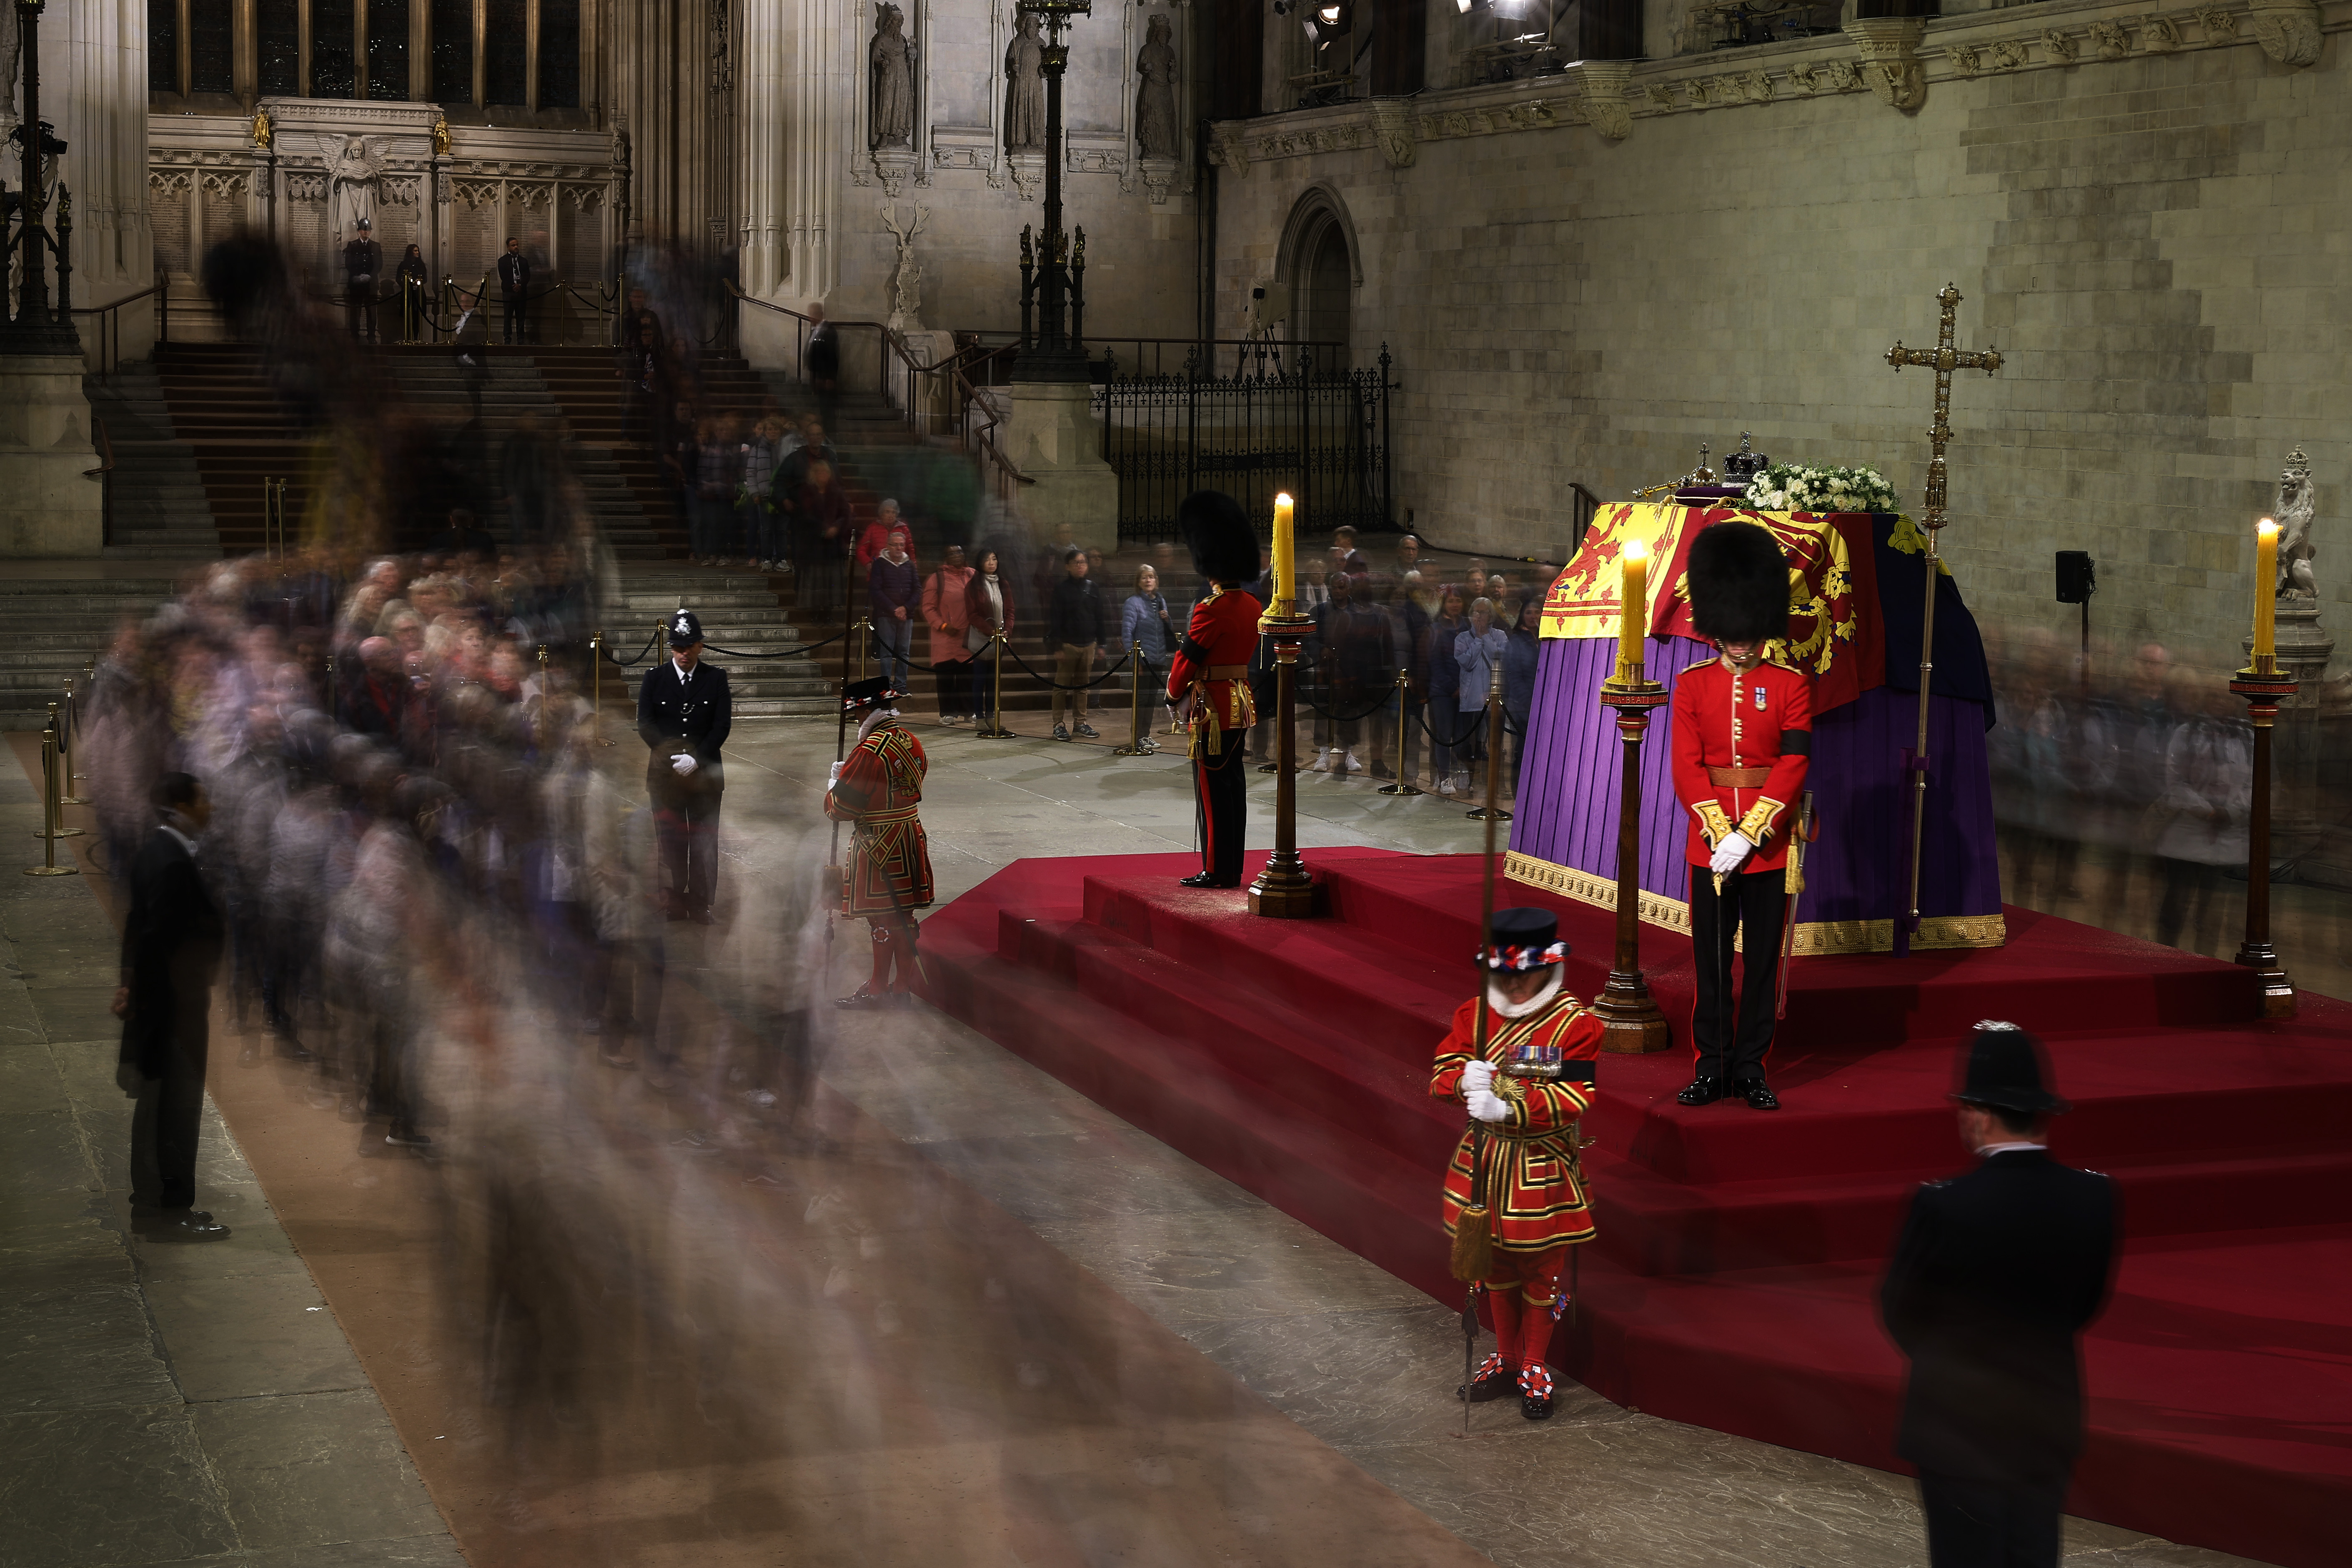 People file past the coffin of Queen Elizabeth II as it lies in state on the catafalque in Westminster Hall, at the Palace of Westminster, London, early Saturday Sept. 17, 2022. The Queen will lie in state in Westminster Hall for four full days before her funeral on Monday Sept. 19. (Chip Somodevilla/Pool via AP)